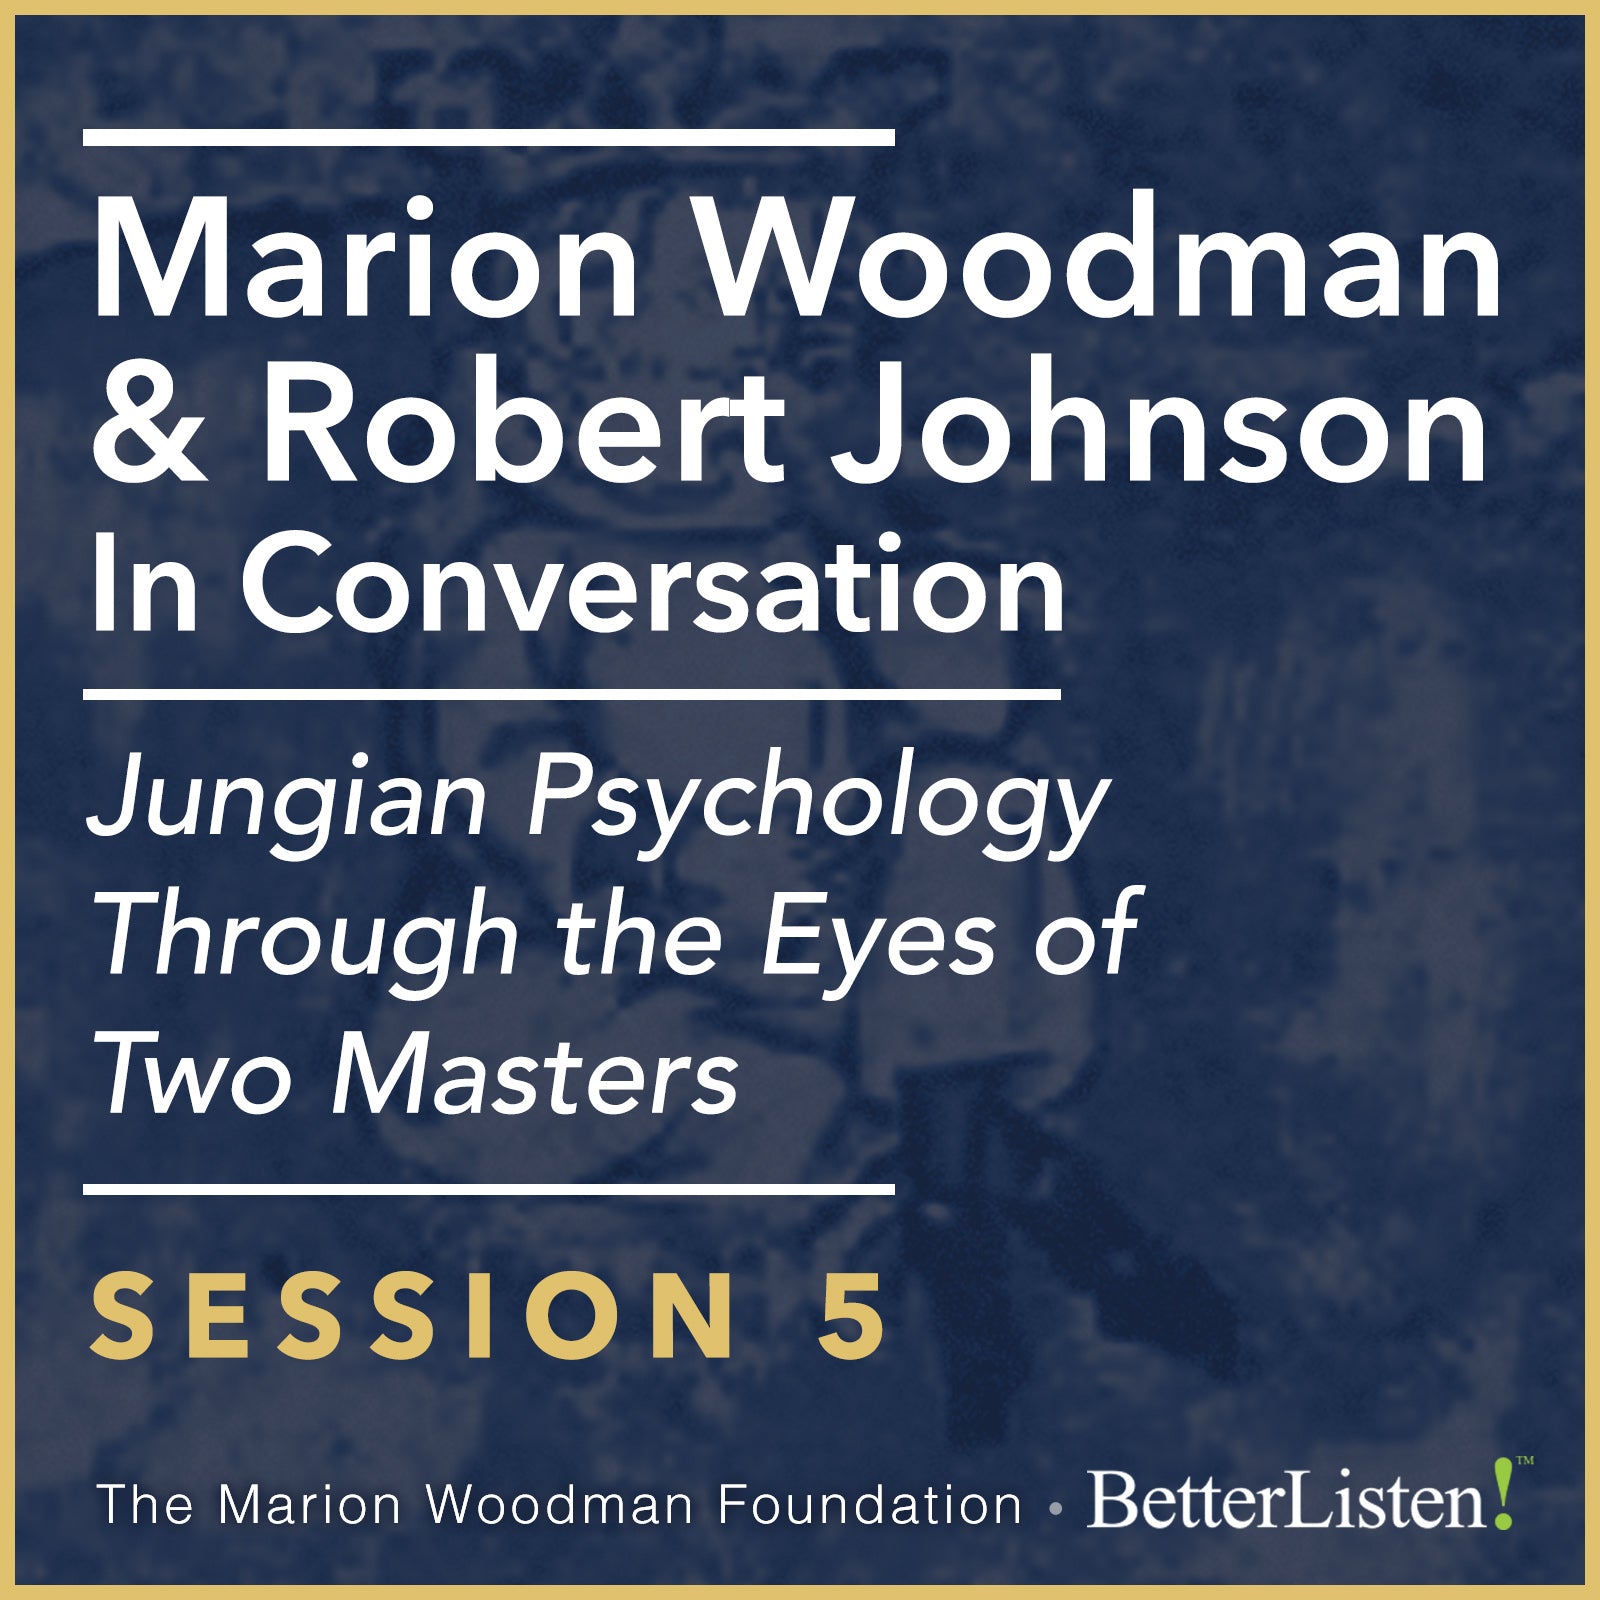 Marion Woodman & Robert Johnson In Conversation: SESSION 5 - Video, Jungian Psychology Through The Eyes of Two Masters